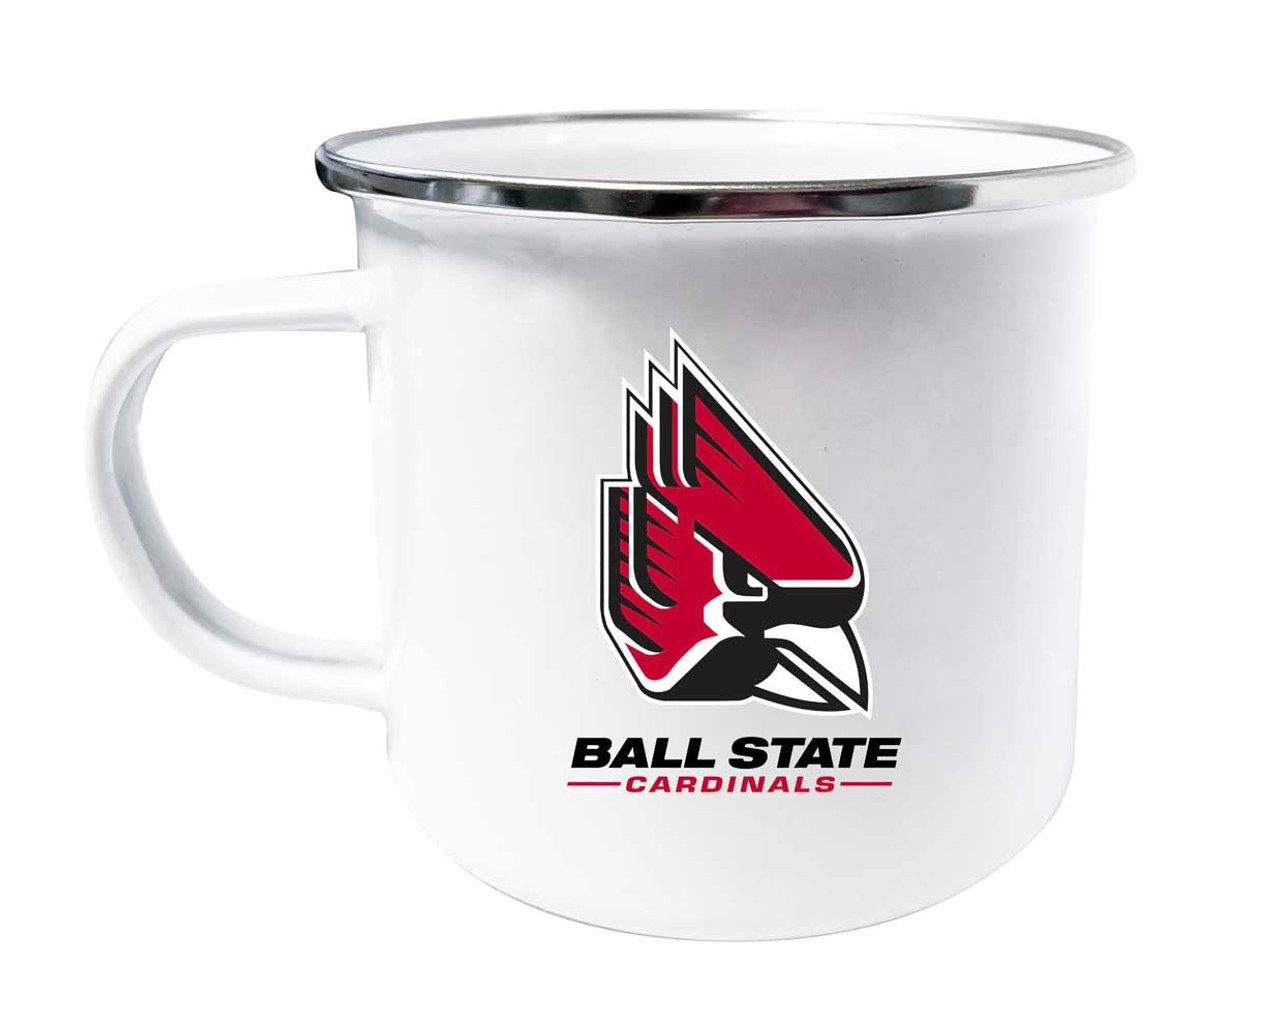 Ball State Tin Camper Coffee Mug Choose Your Color (Choose Your Color).